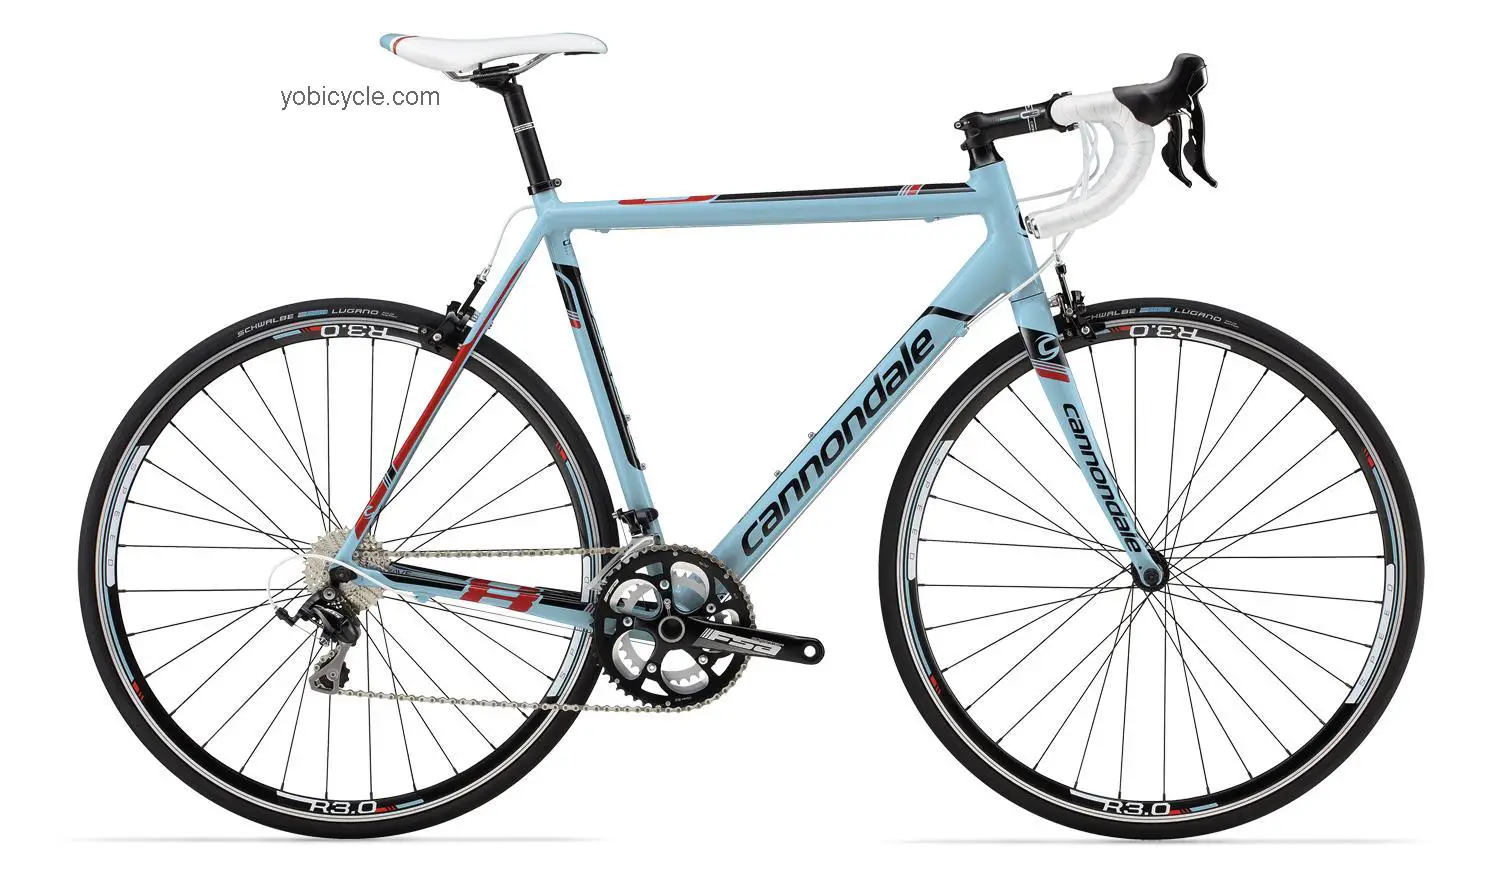 Cannondale CAAD8 5 105 Compact competitors and comparison tool online specs and performance